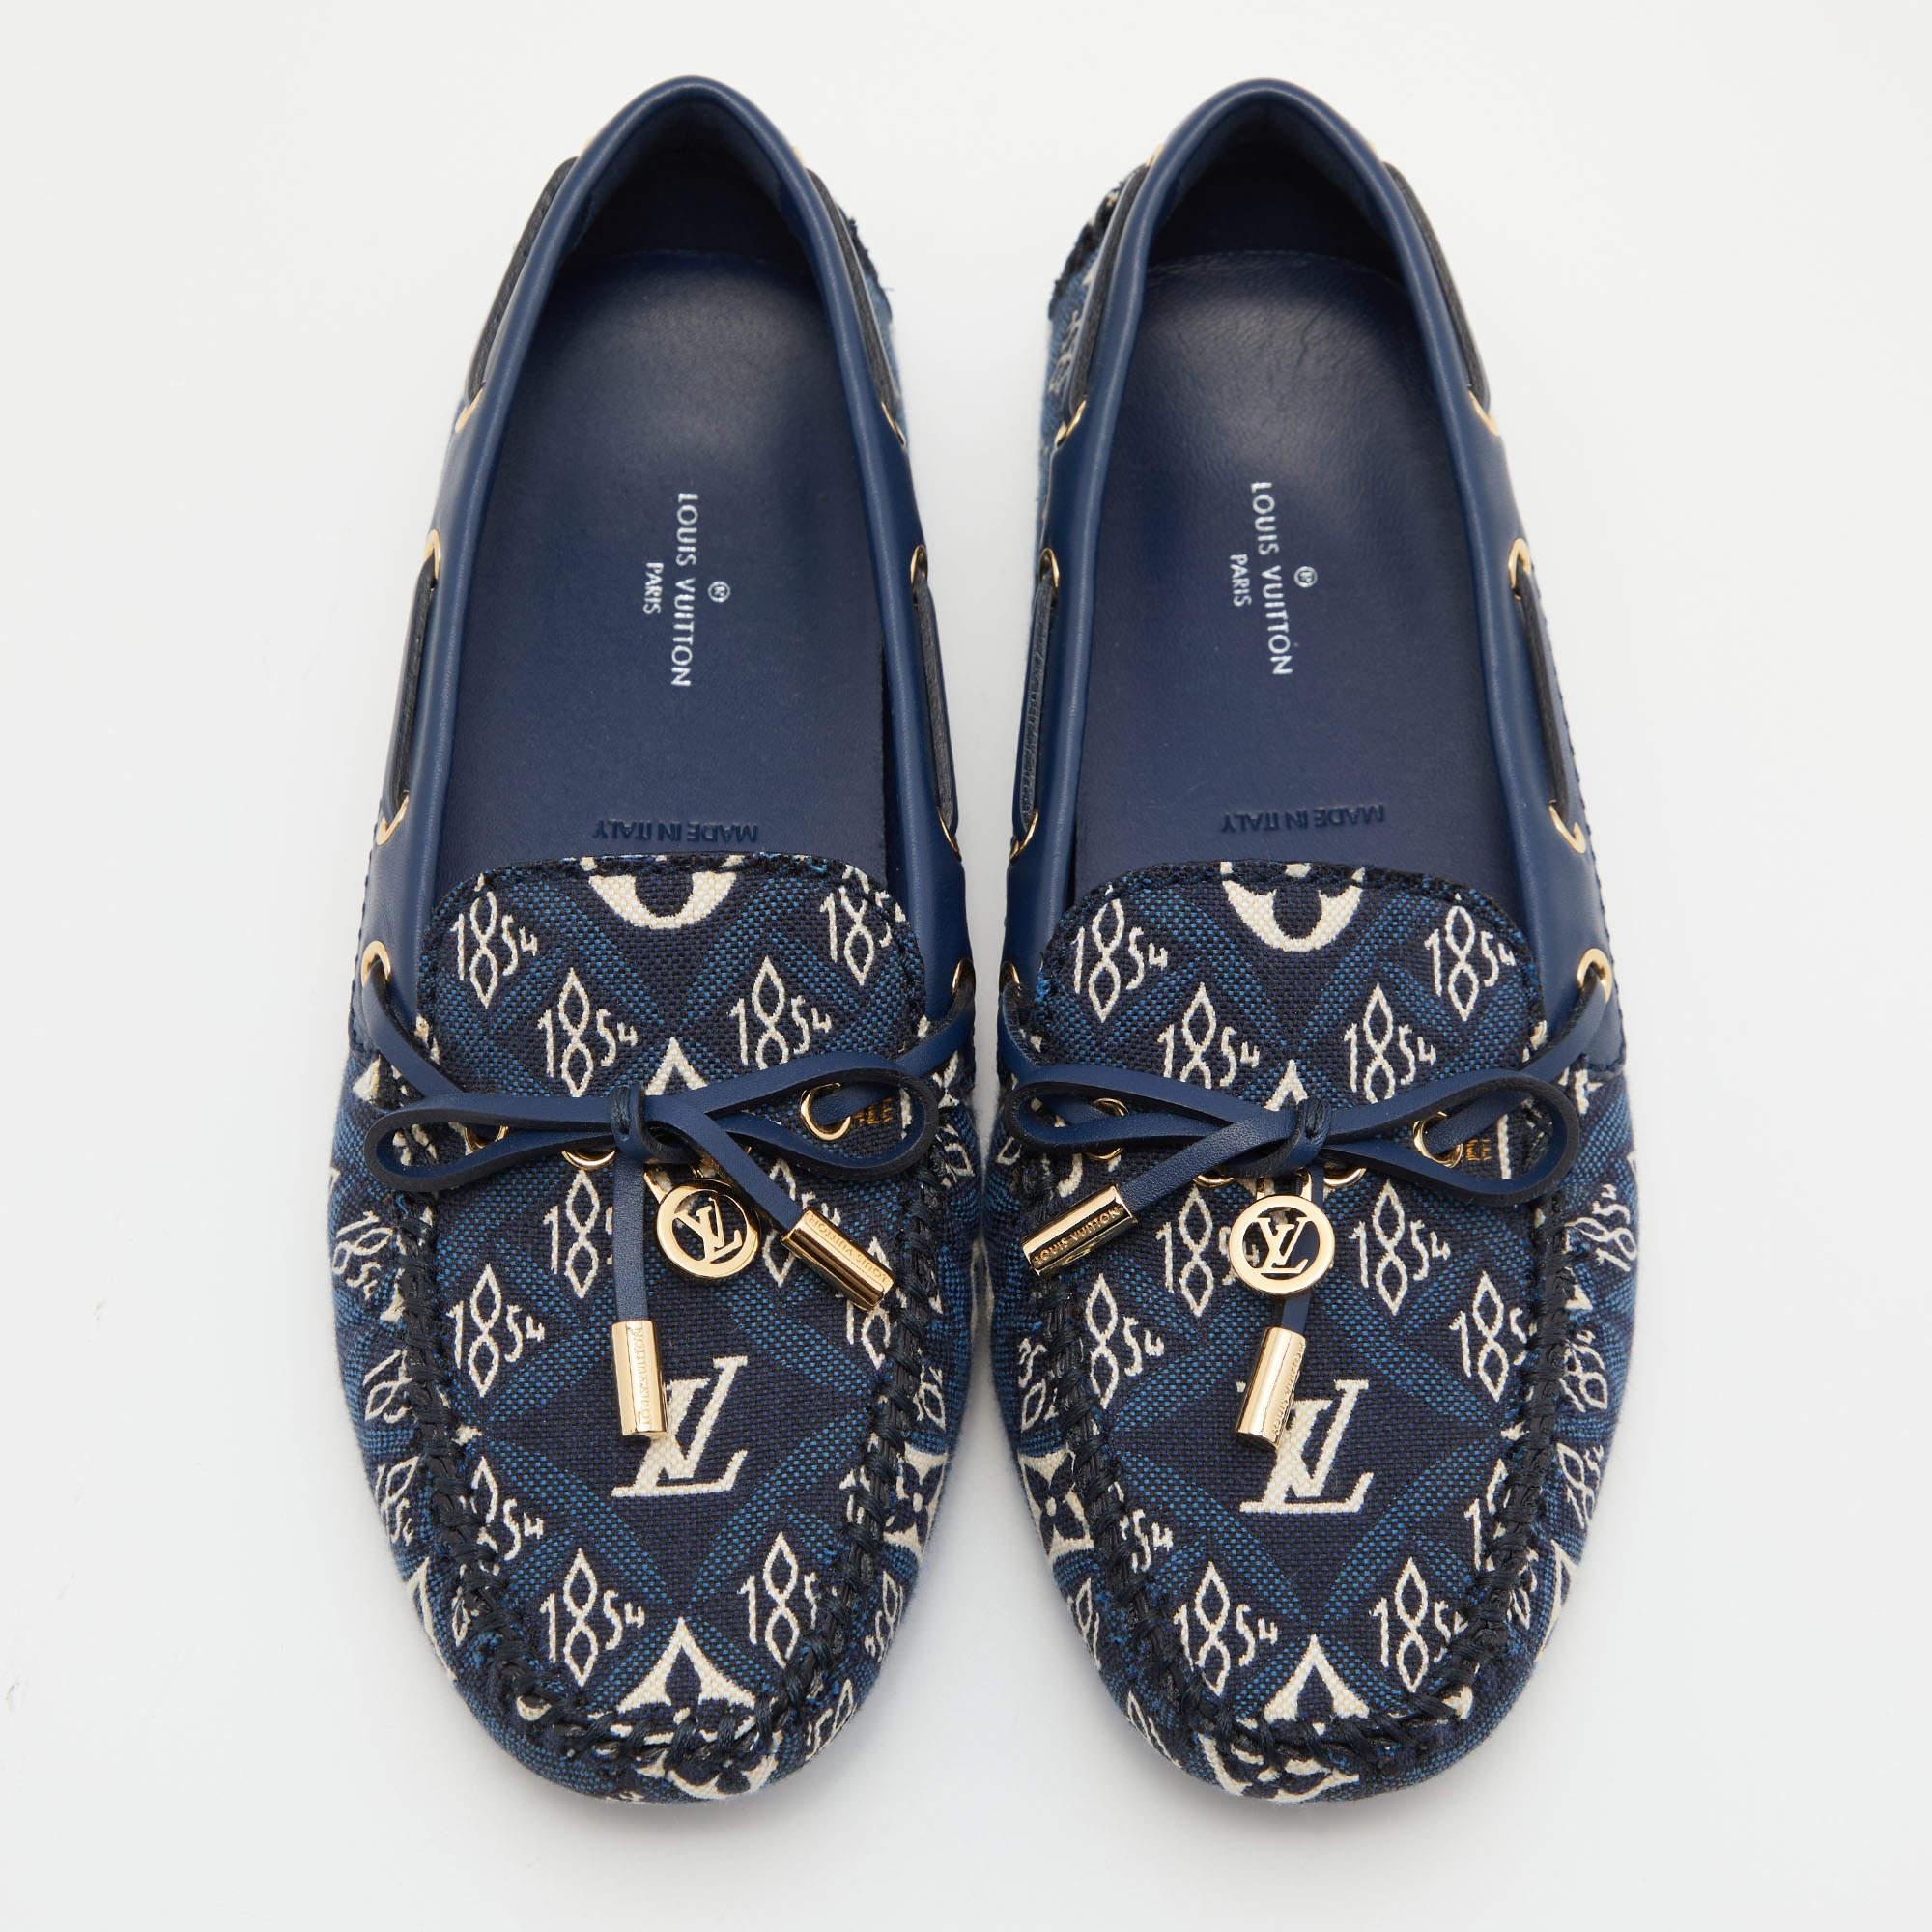 To perfectly complement your attires, Louis Vuitton brings you this pair of loafers that speak nothing but style. They have been crafted from Monogram canvas and styled with ties on the front. The comfortable loafers are easy to slip on, and they